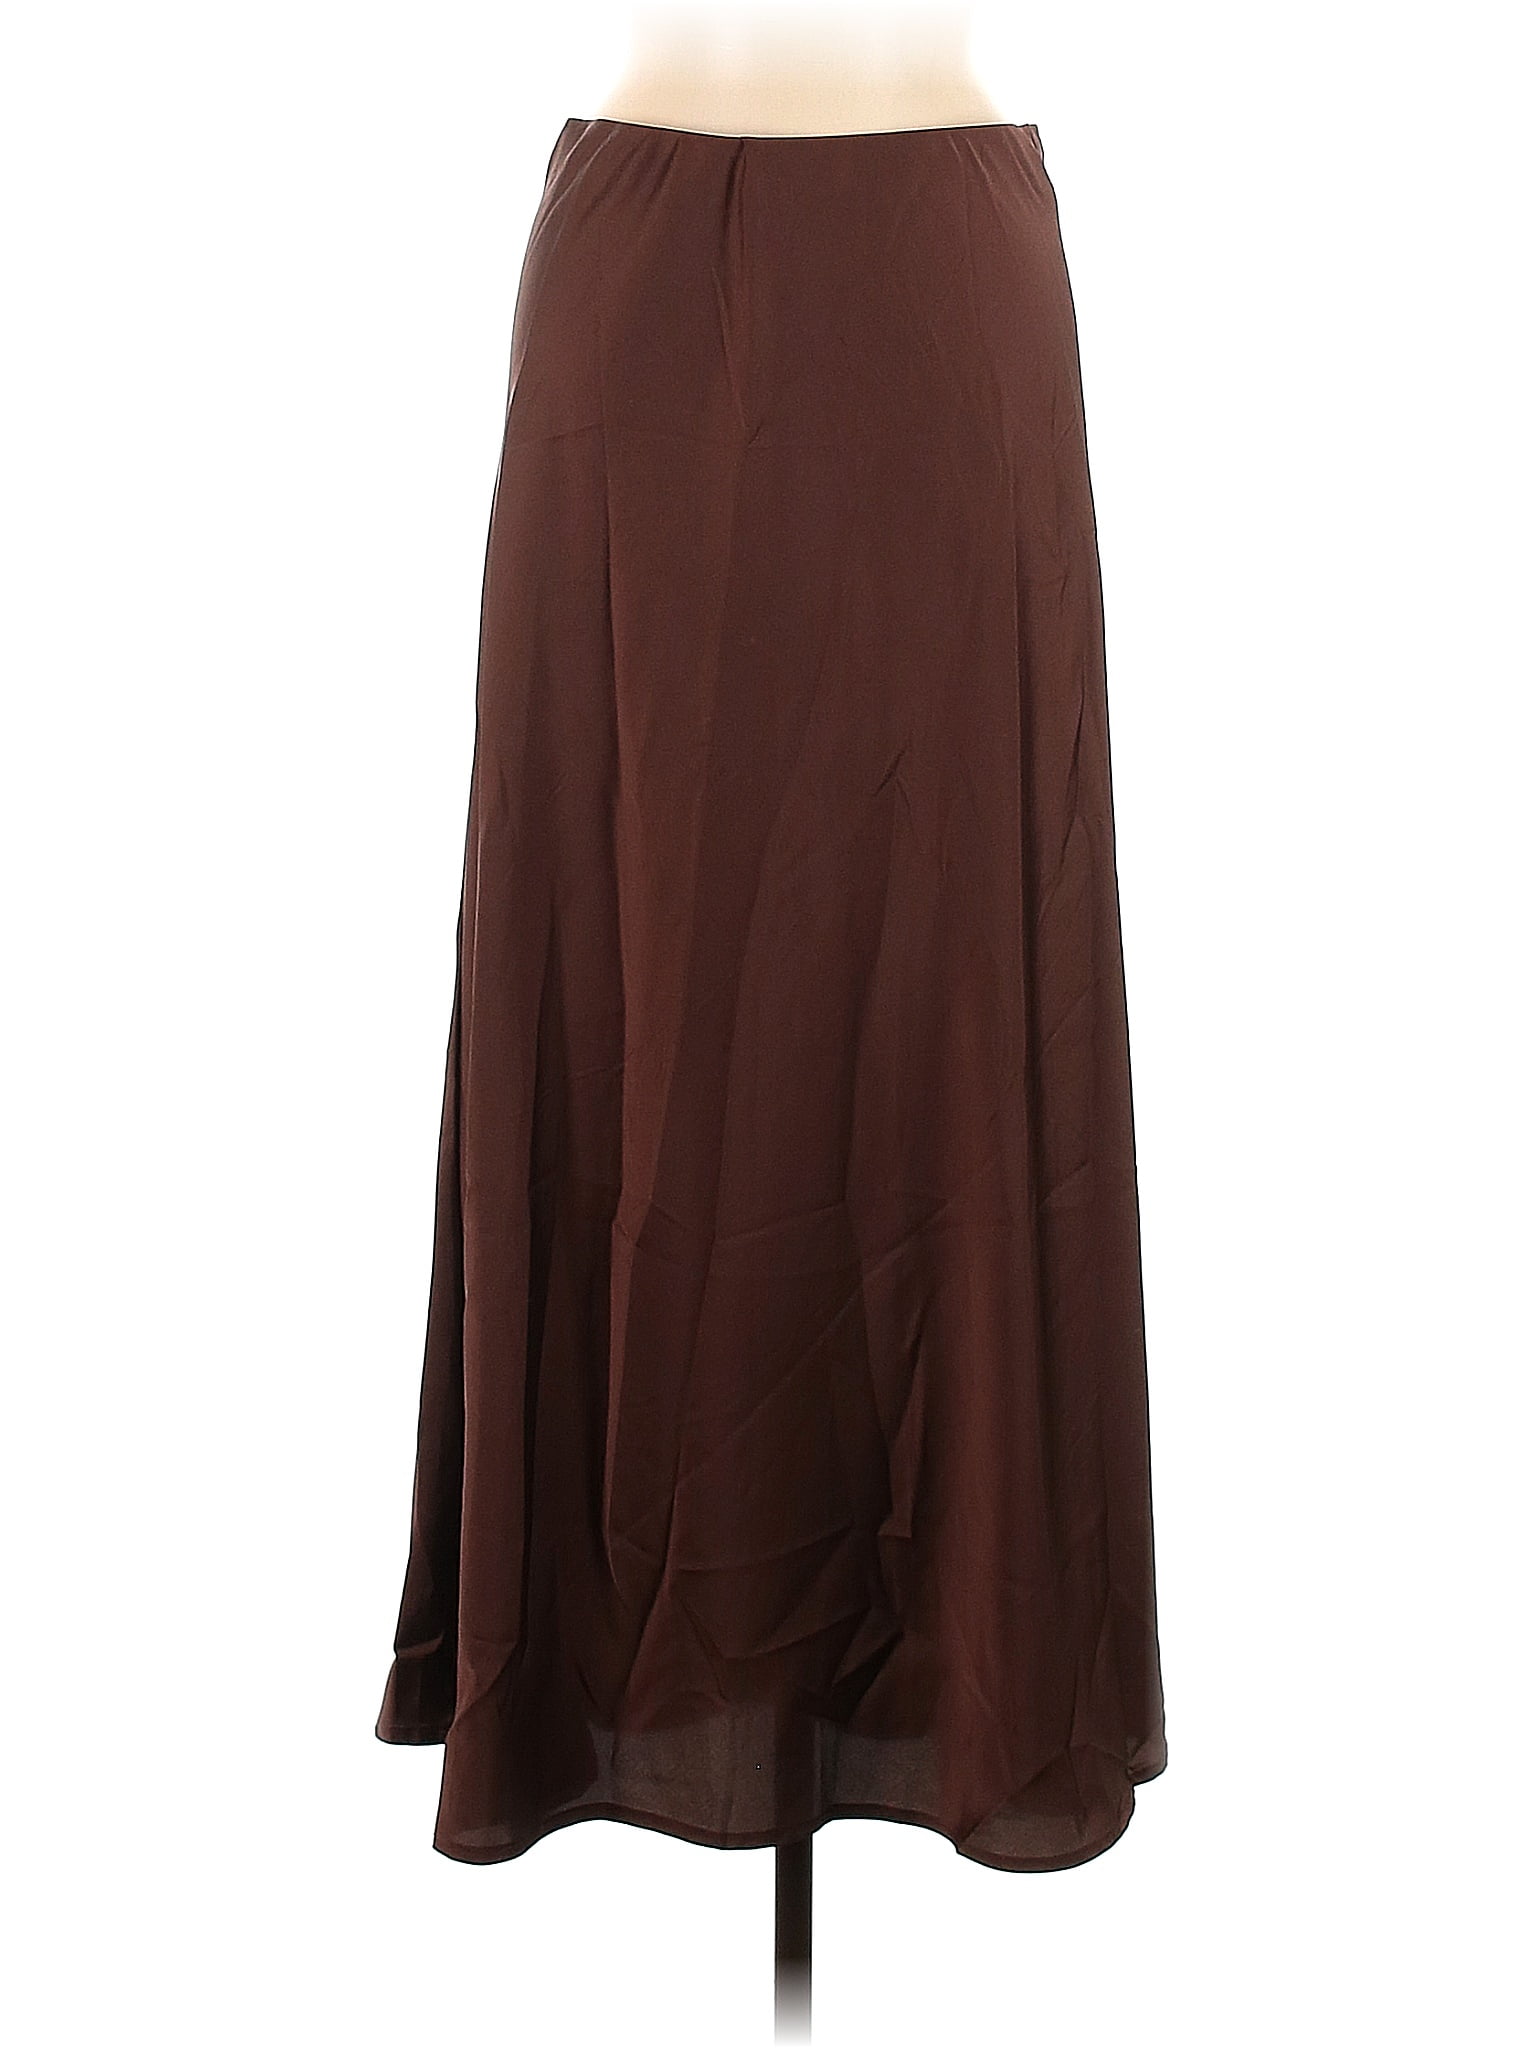 Cotton On Brown Casual Skirt Size M - 31% off | thredUP